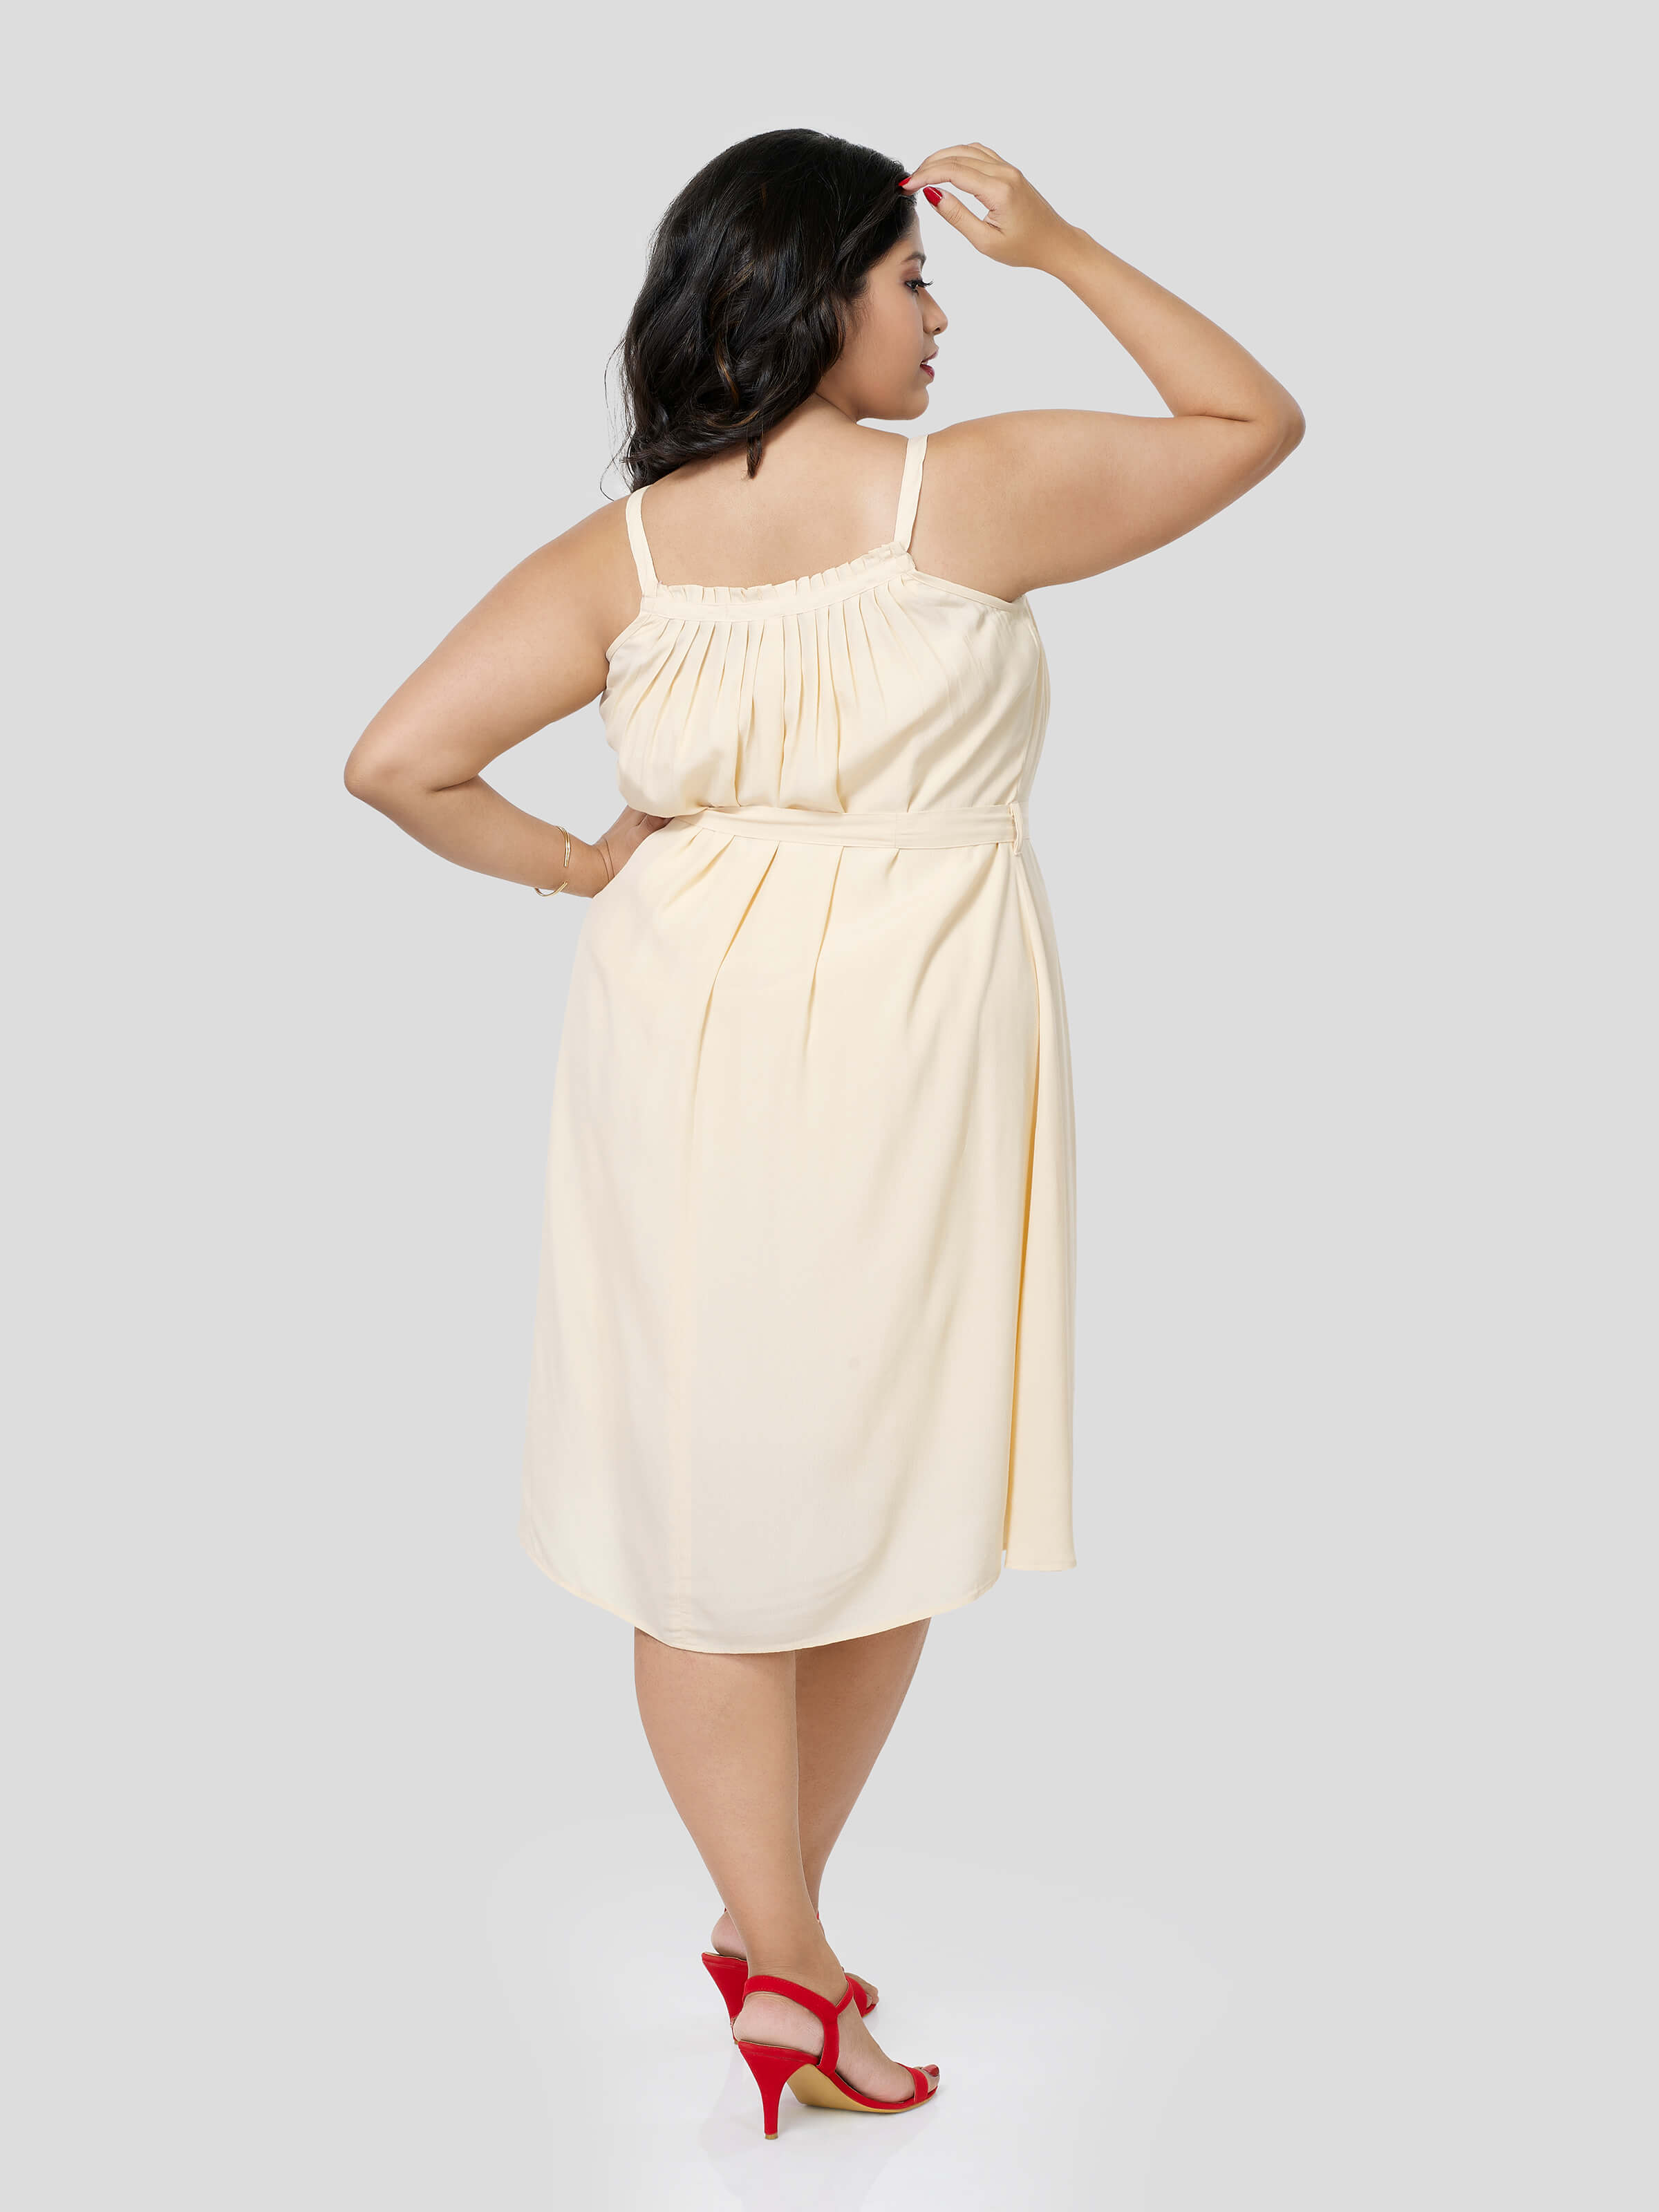 Soft Aggression look in Frill Front Dress - Zest Mélange 